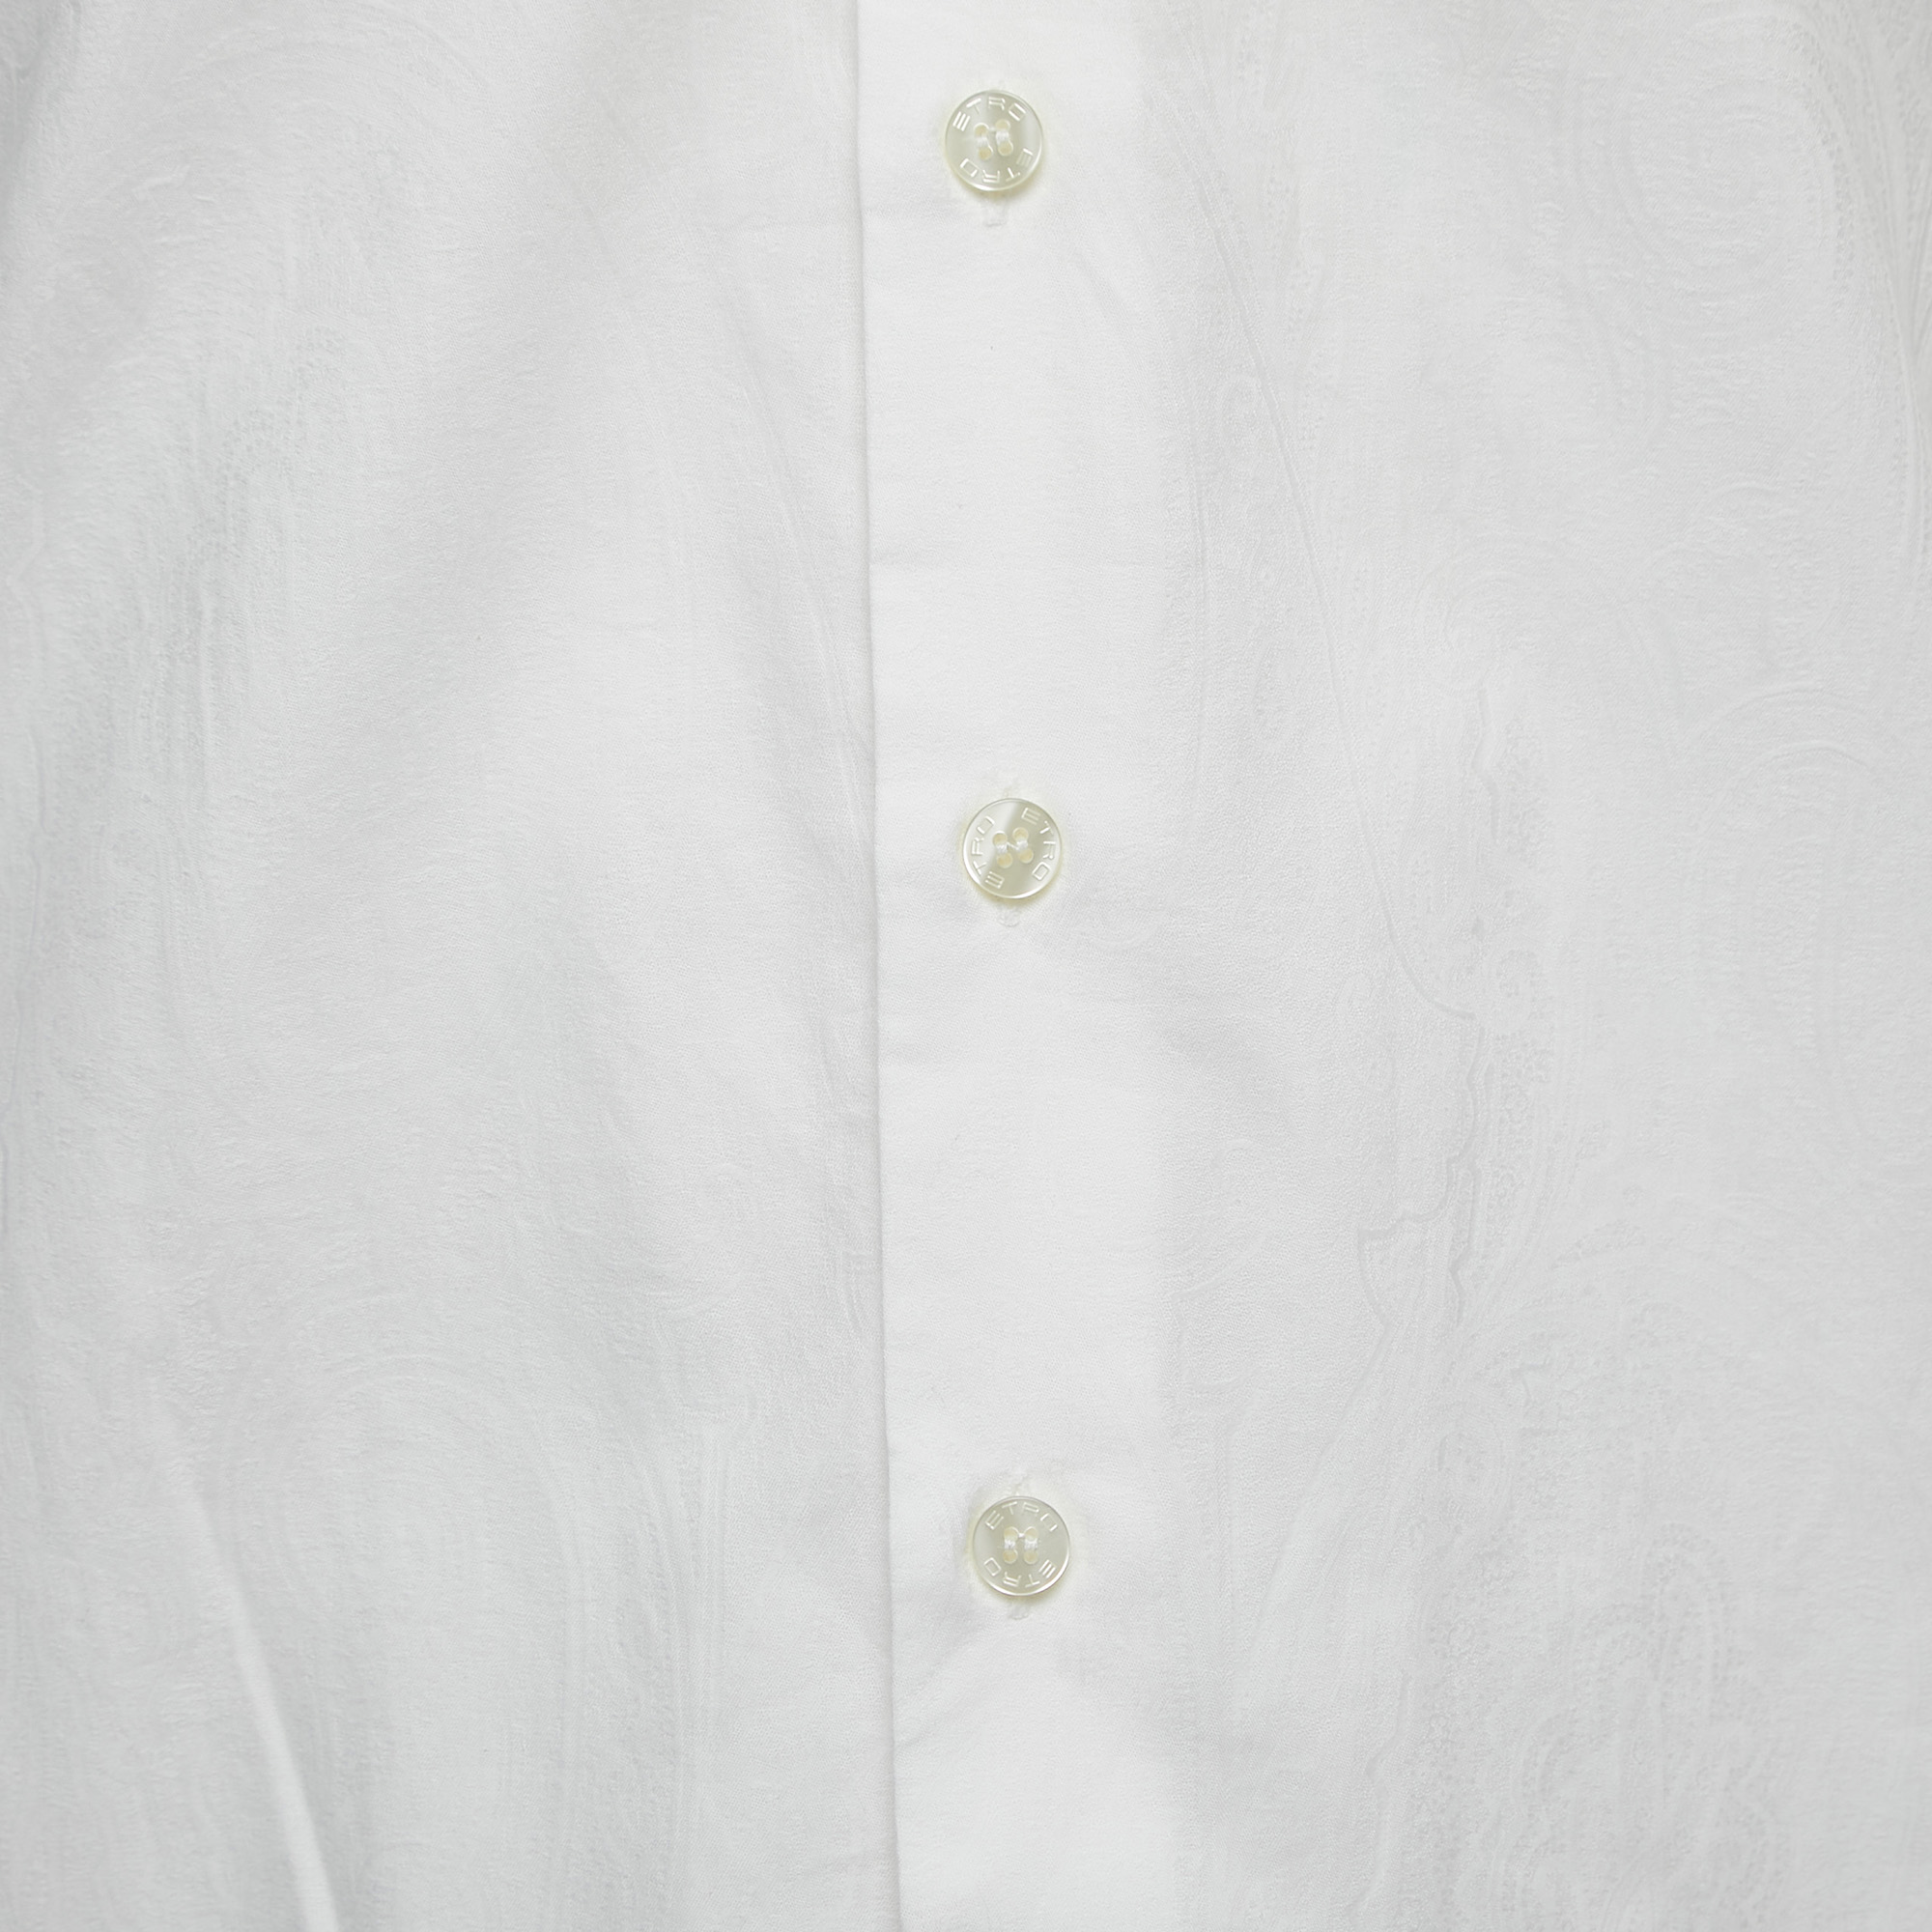 Etro White Patterned Cotton Button Front Full Sleeve Shirt M